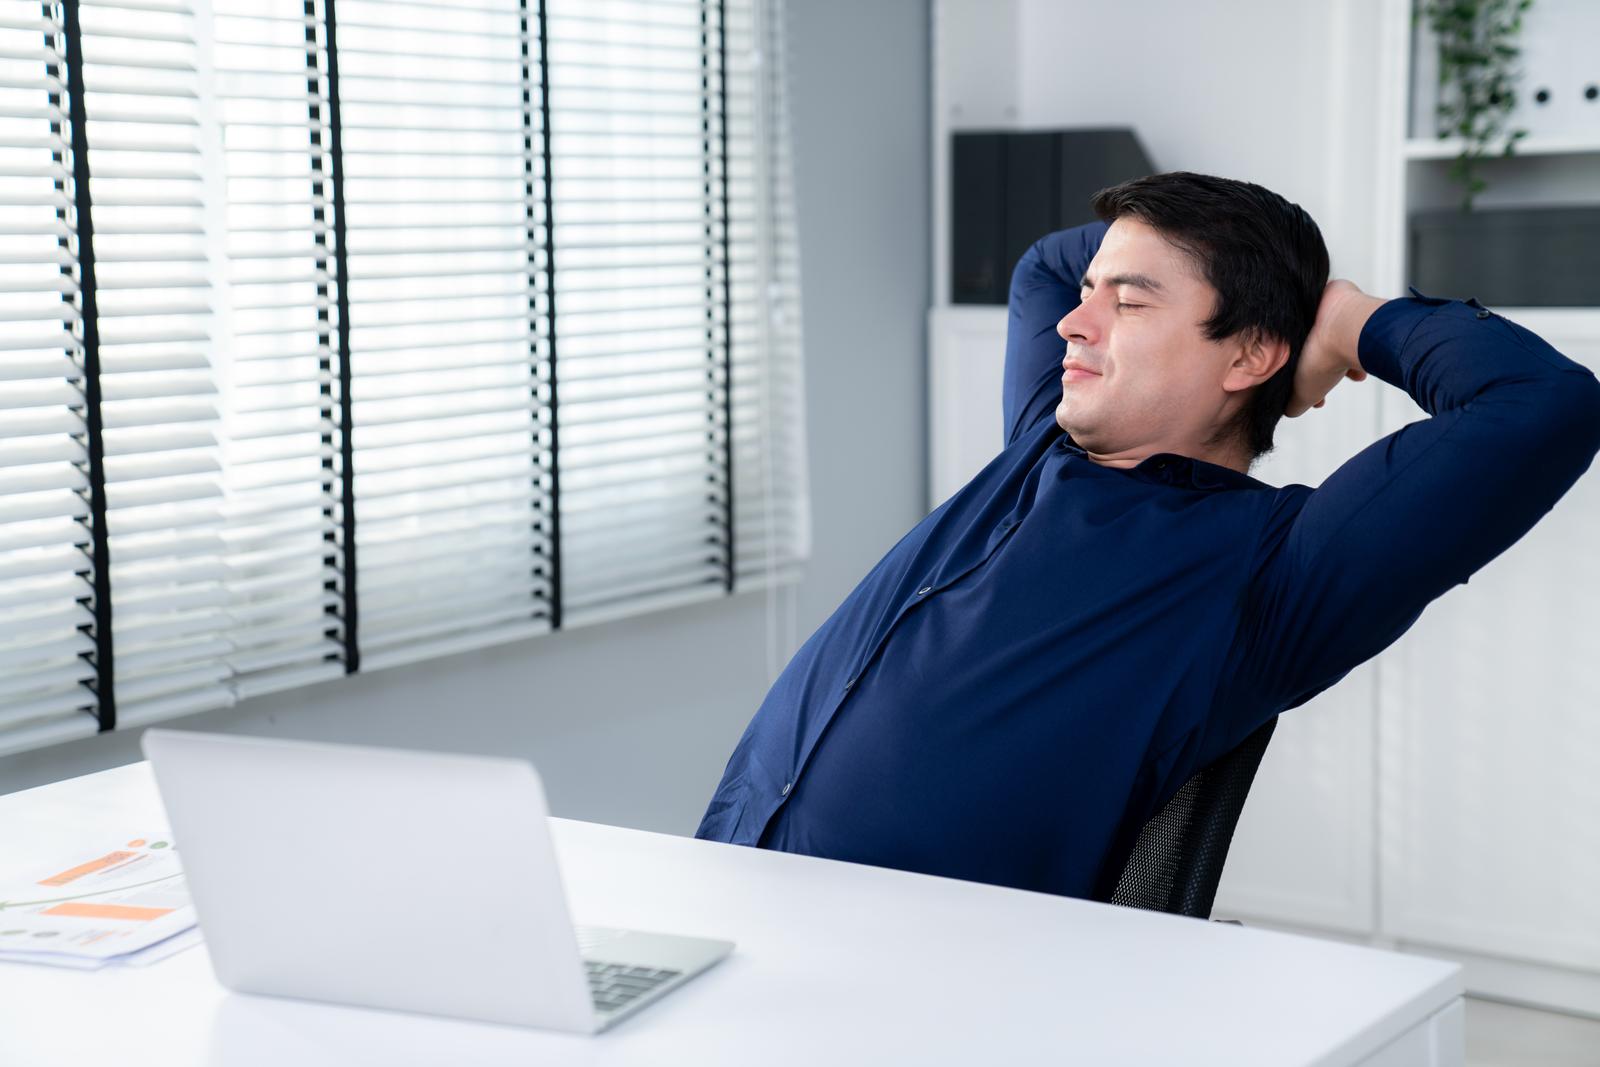 Buying an Ergonomic Chair: The Best Tips For Choosing The Right Chair